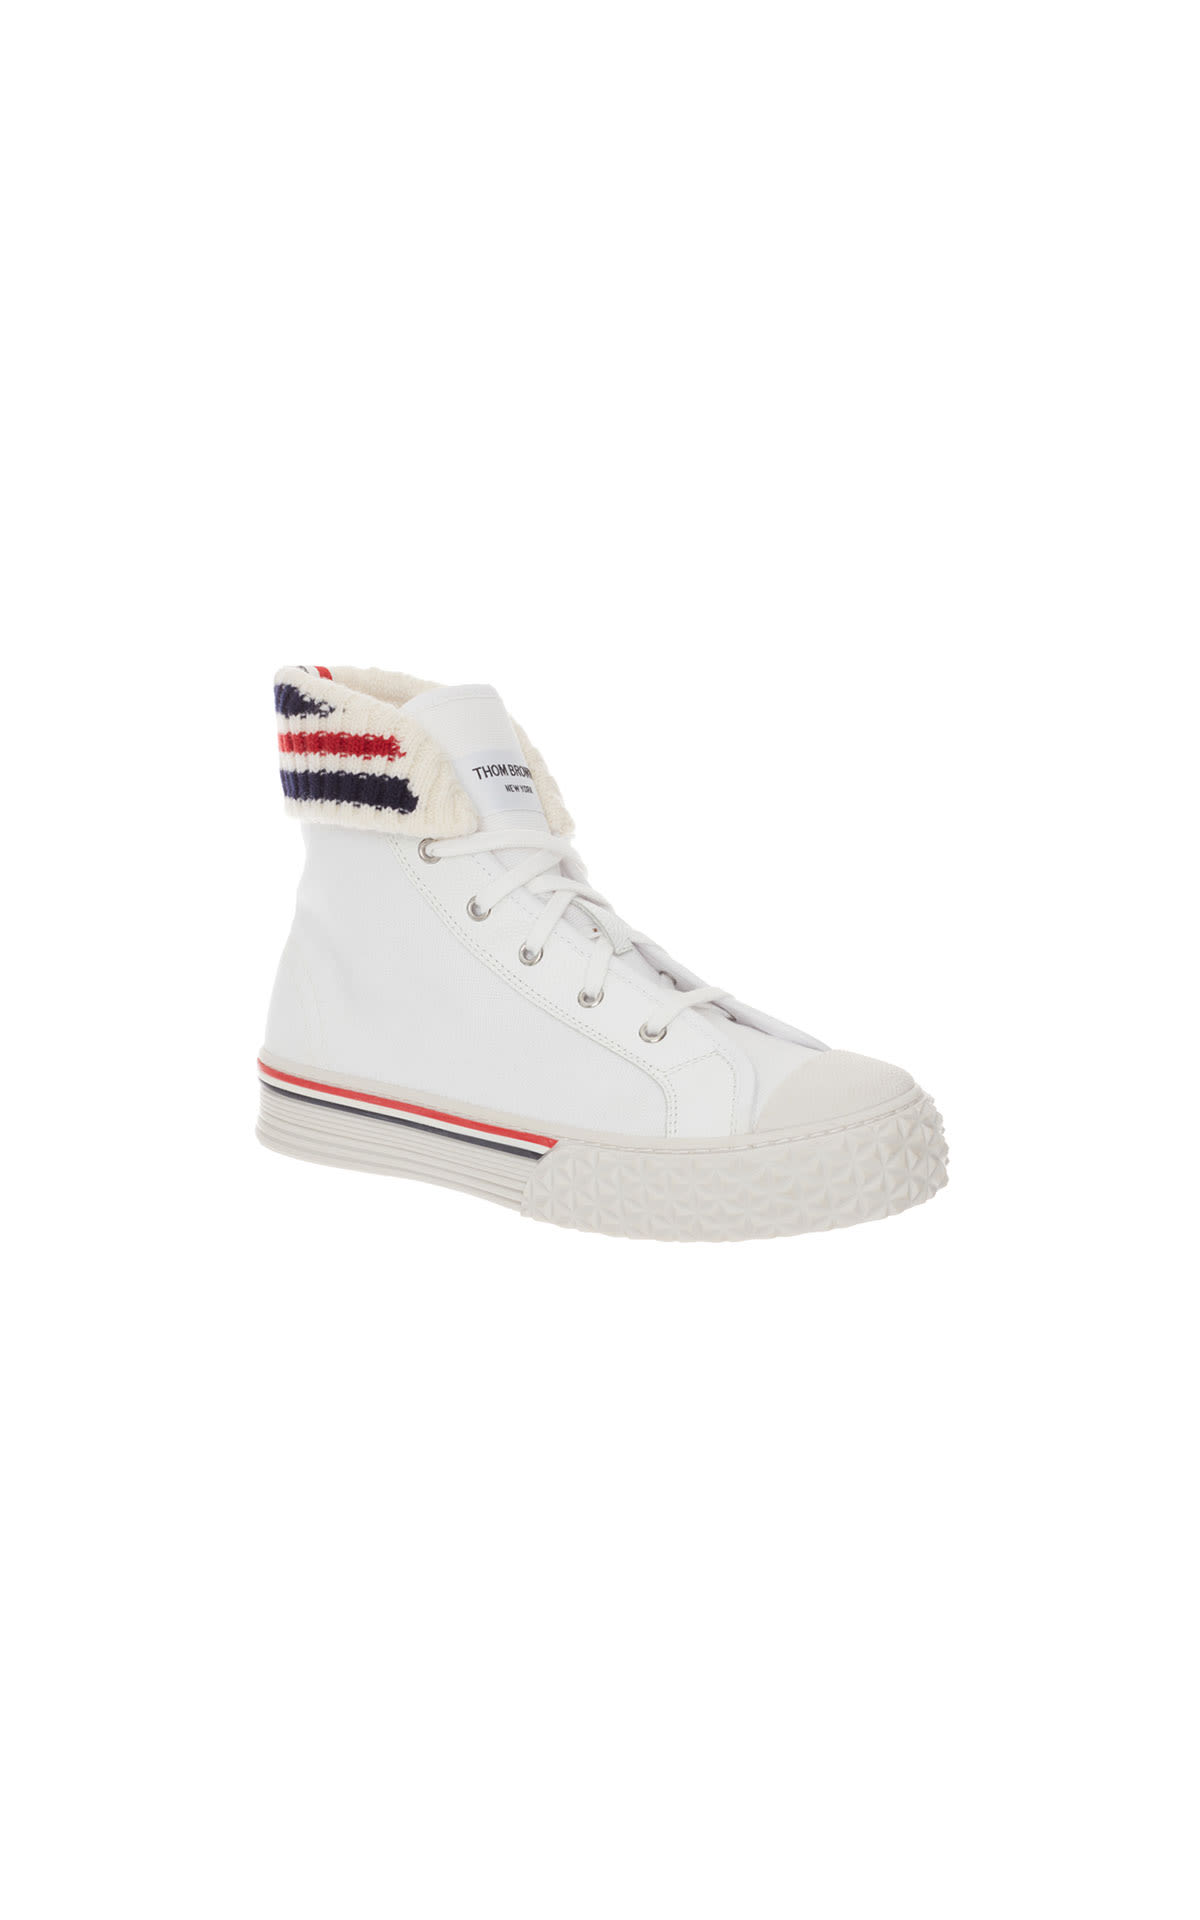 Thom Browne Collegiate high top sneakers from Bicester Village